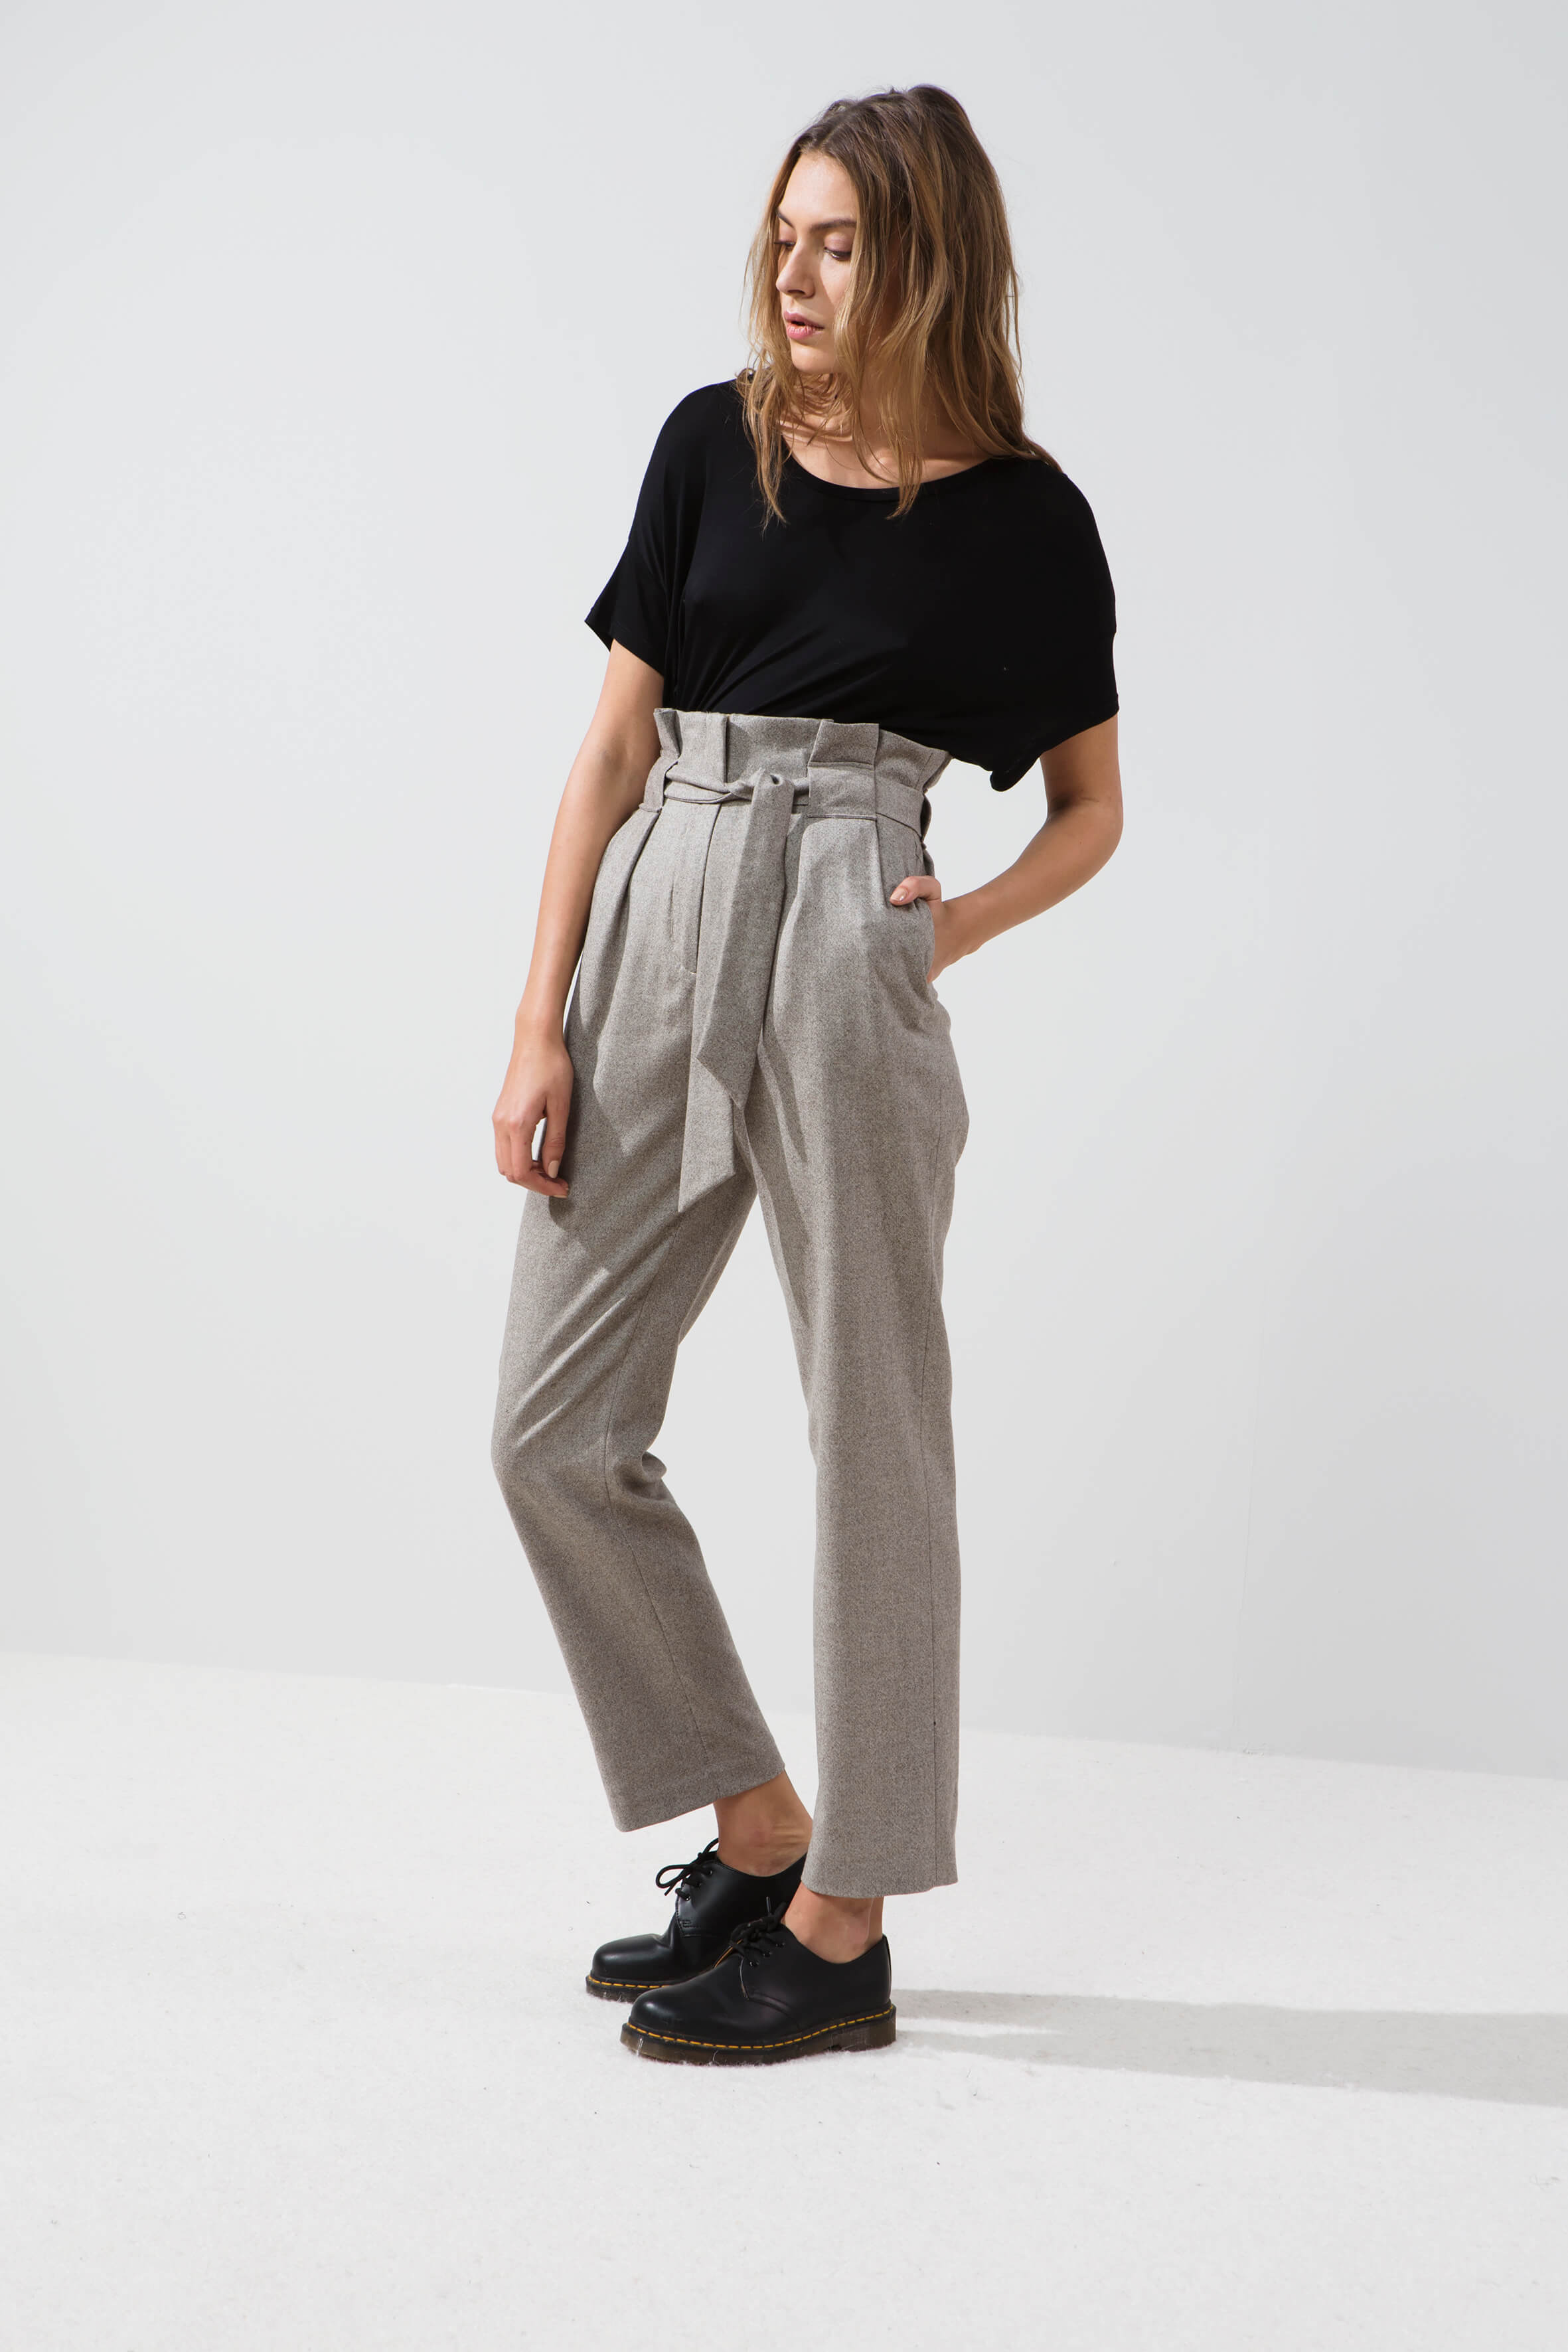 MARGAUX LONNBERG Oswald Pants | FAUBOURG